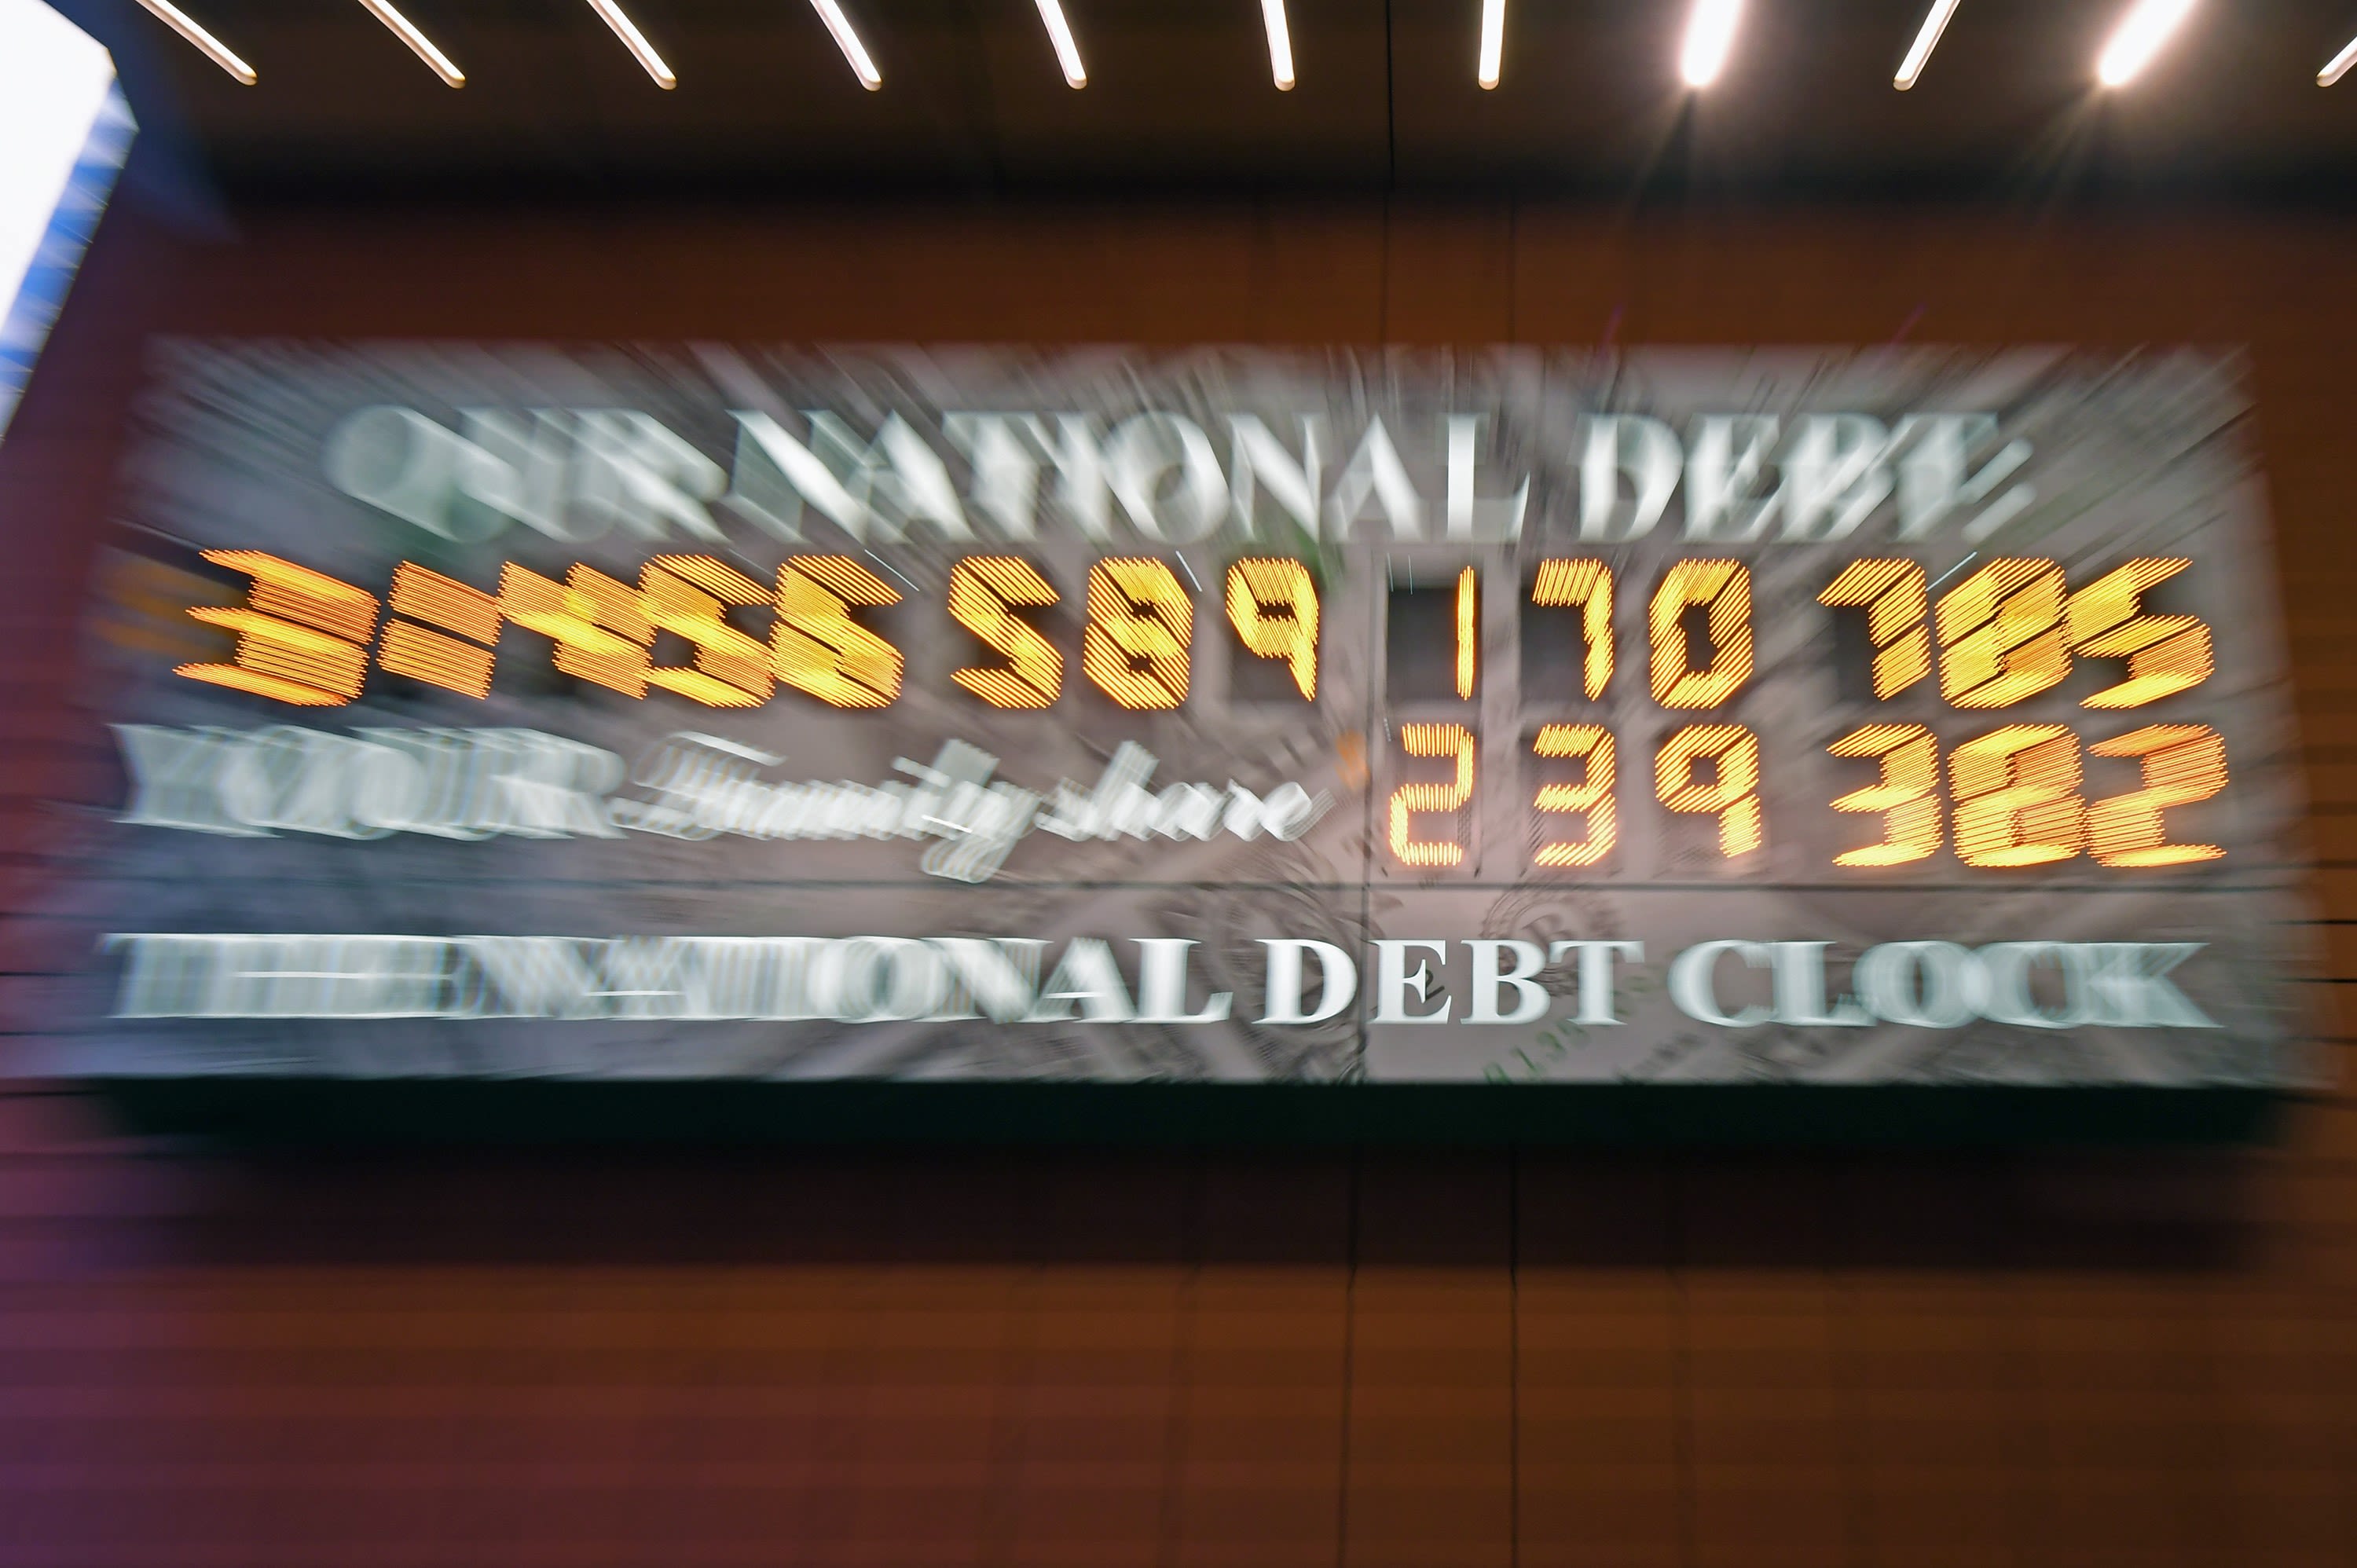 Wall Street is focused on the national debt. Presidential candidates less so.